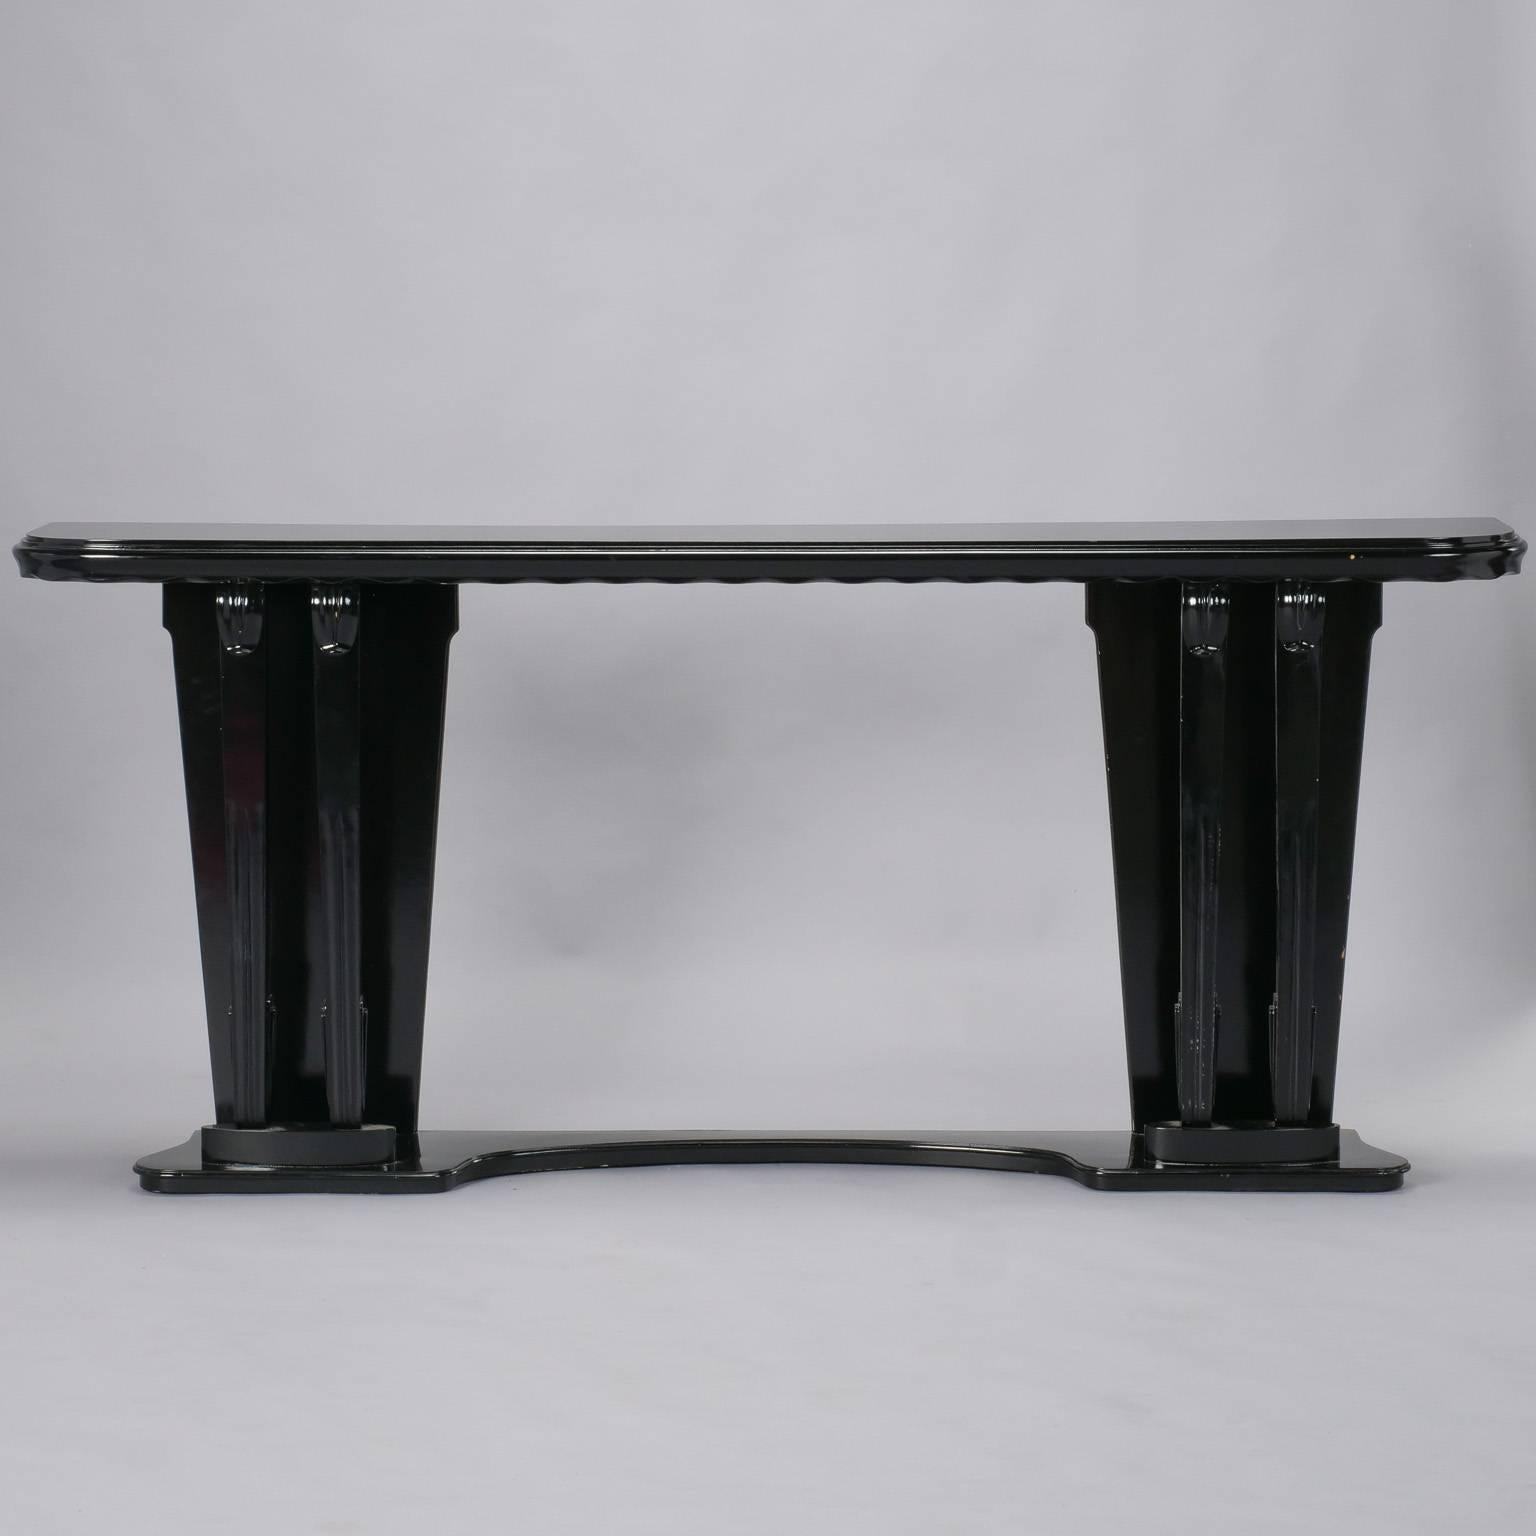 Italian wooden console with ebonized finish, scalloped edge apron and curved pedestal base, circa 1930s. Unknown maker.